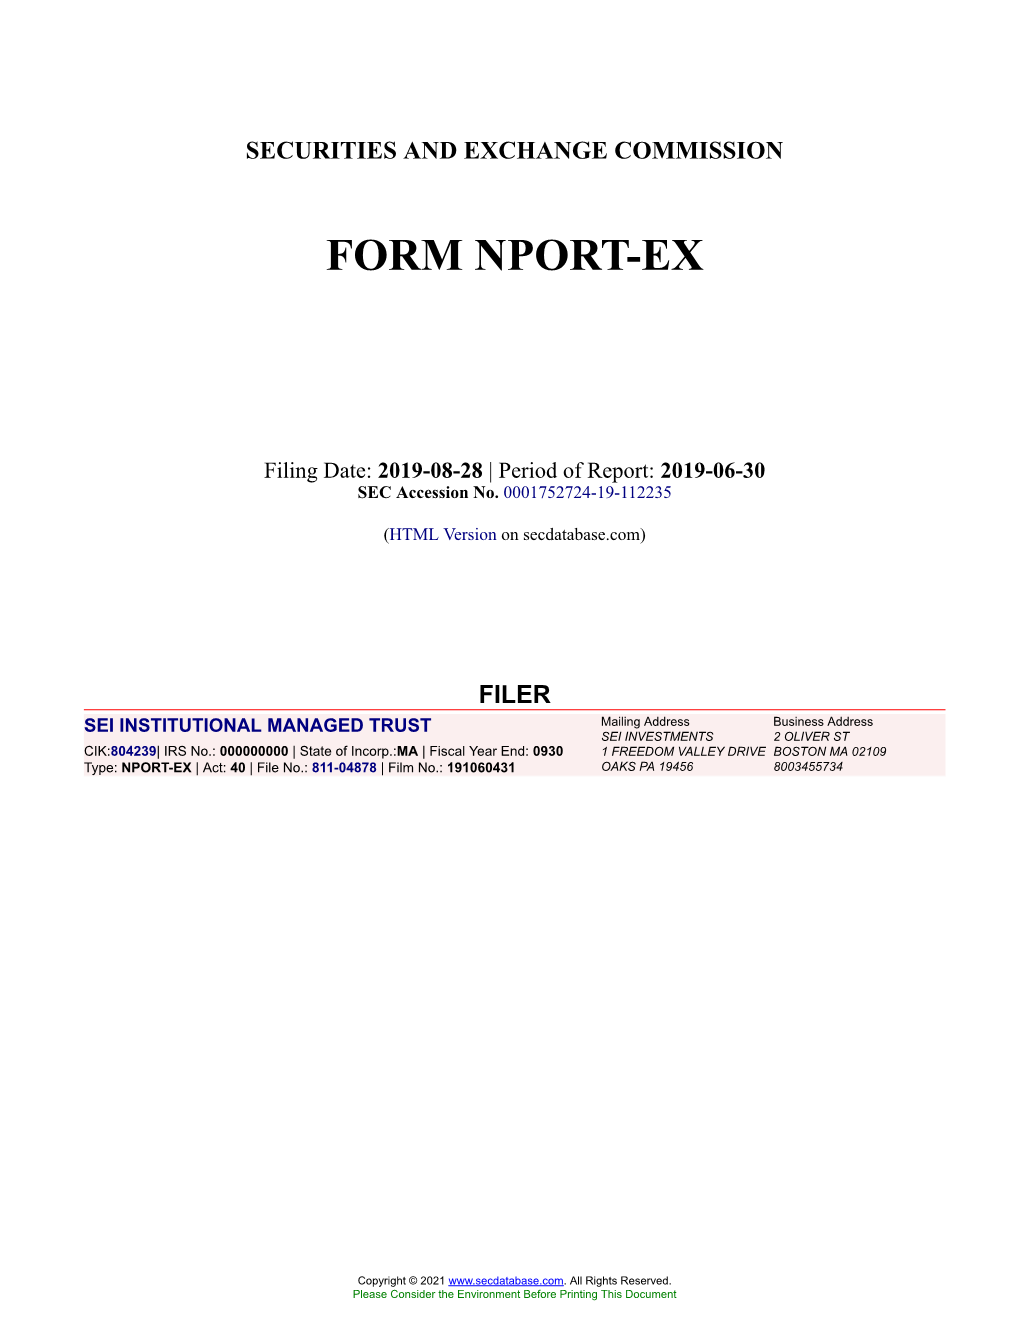 SEI INSTITUTIONAL MANAGED TRUST Form NPORT-EX Filed